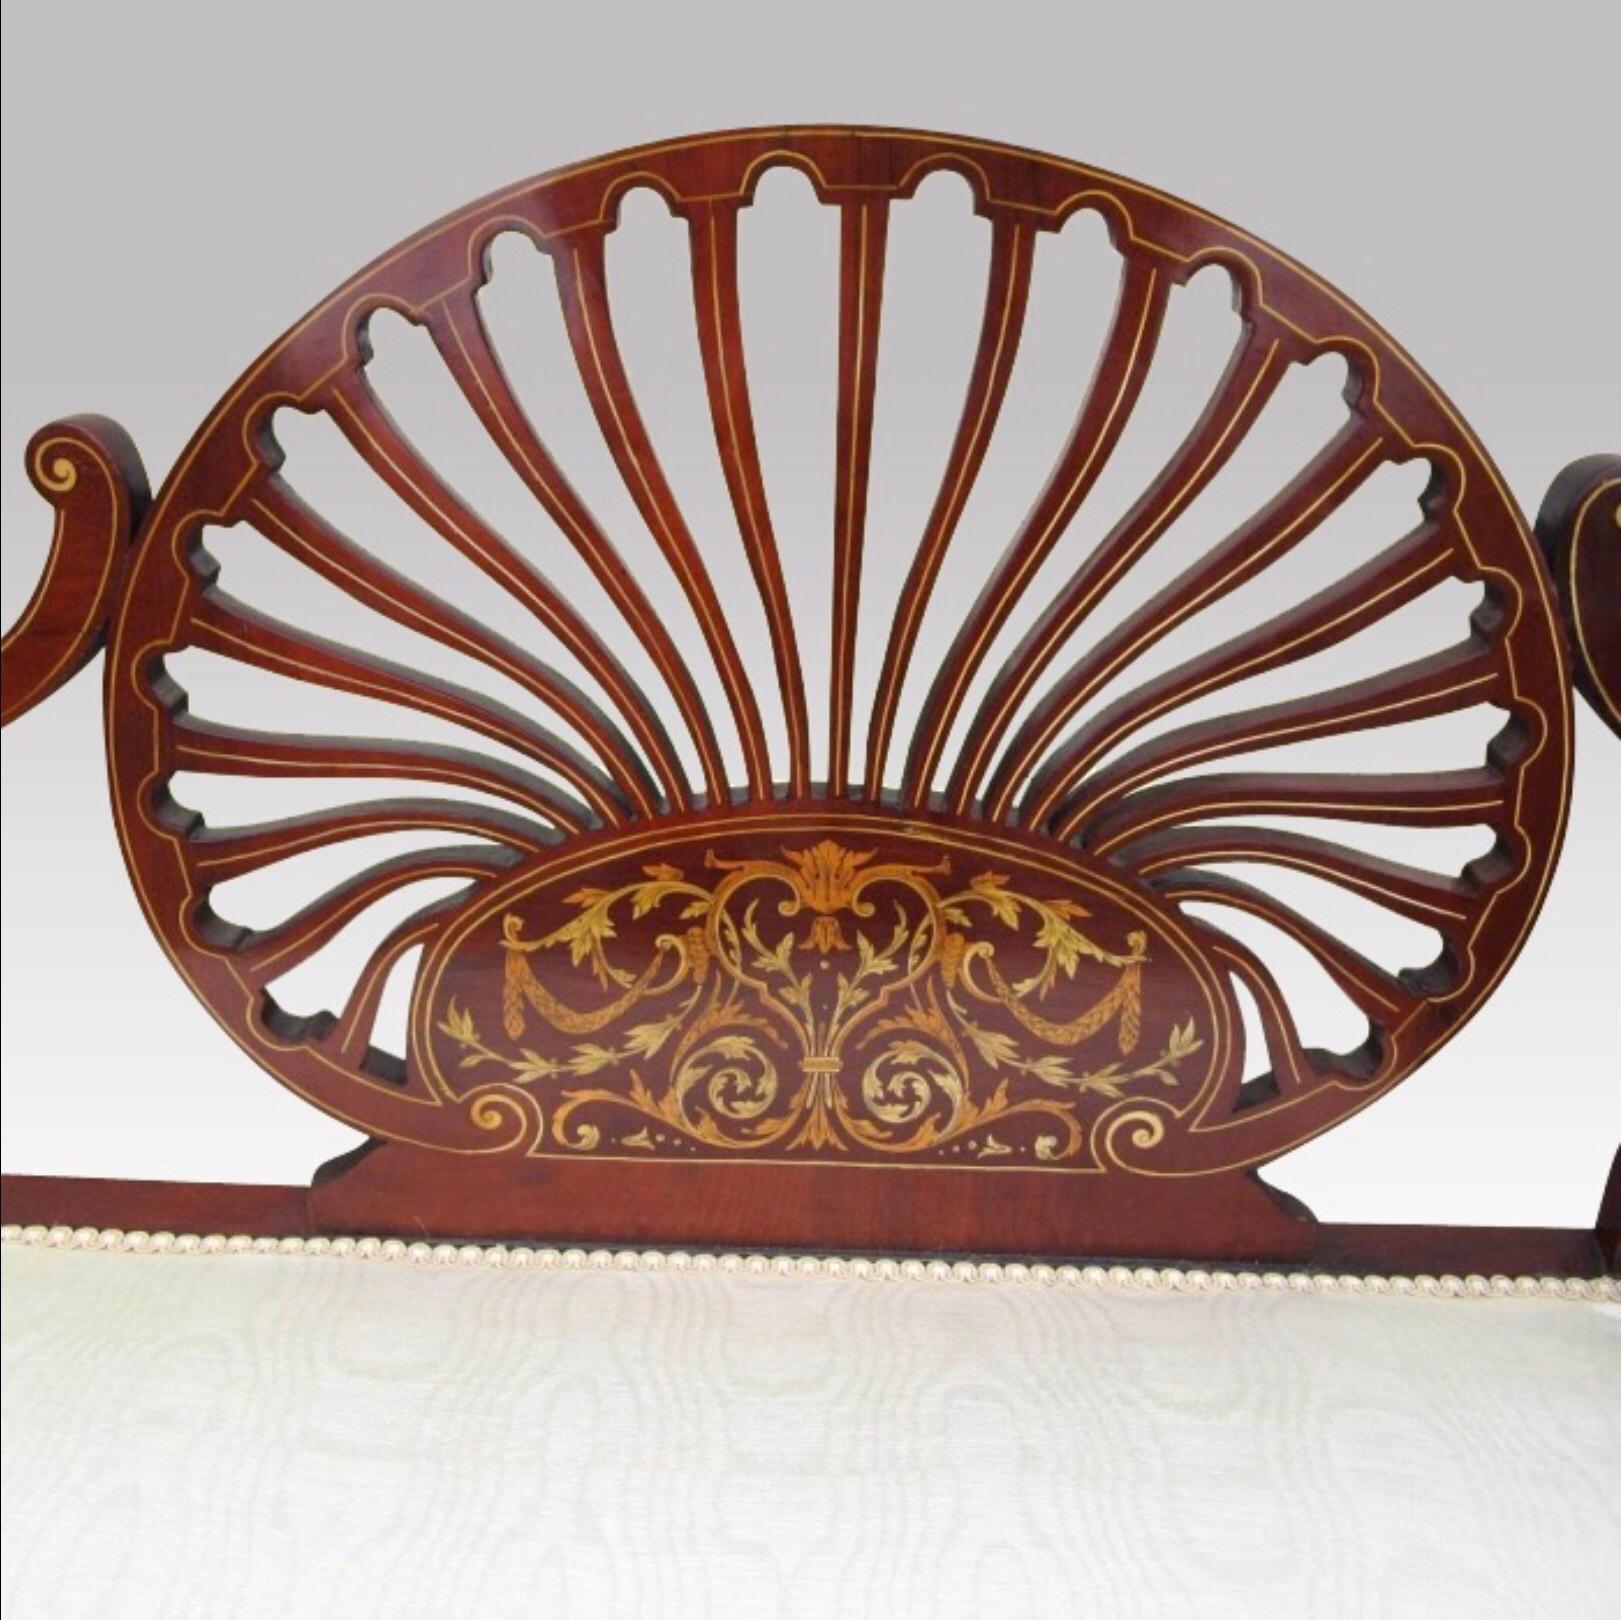 Edwardian Antique Inlaid Mahogany Settee Window Seat of Small Proportions